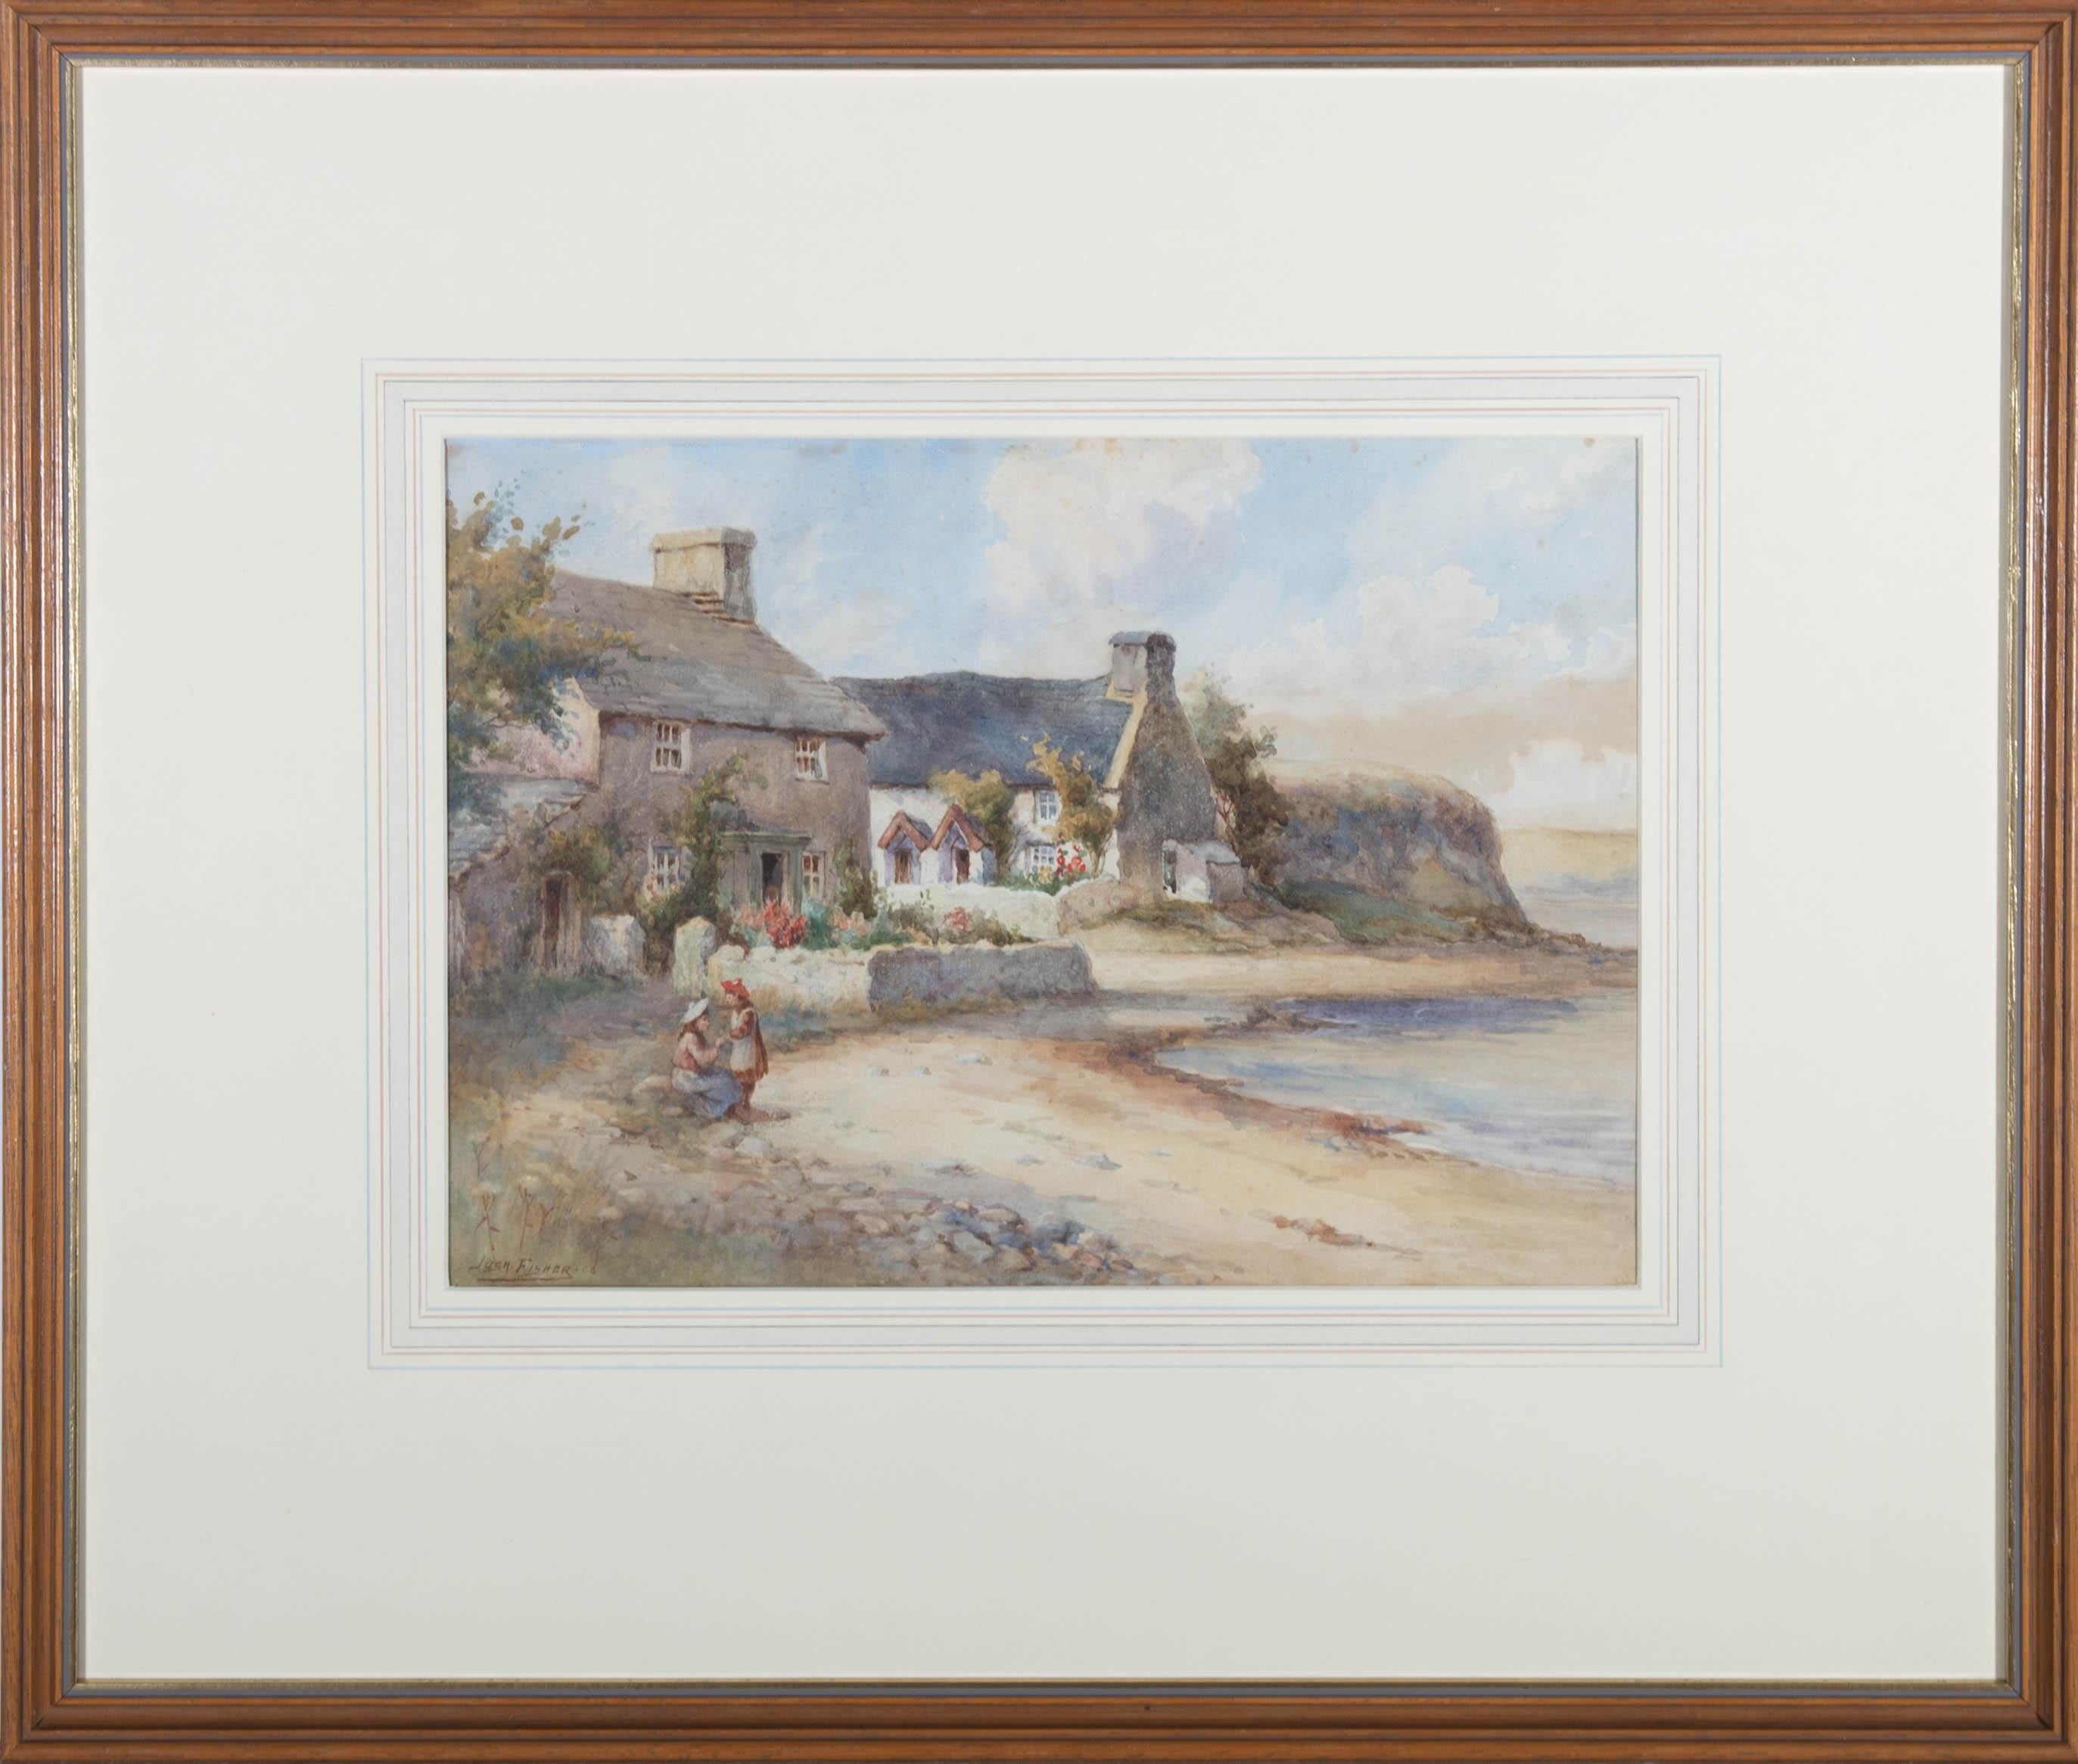 A fine and accomplished watercolour painting by the well-listed artist Joshua Fisher. The scene depicts coastal cottages with two young girls by the shore. Signed and dated to the lower left-hand corner. There is a label on the reverse inscribed